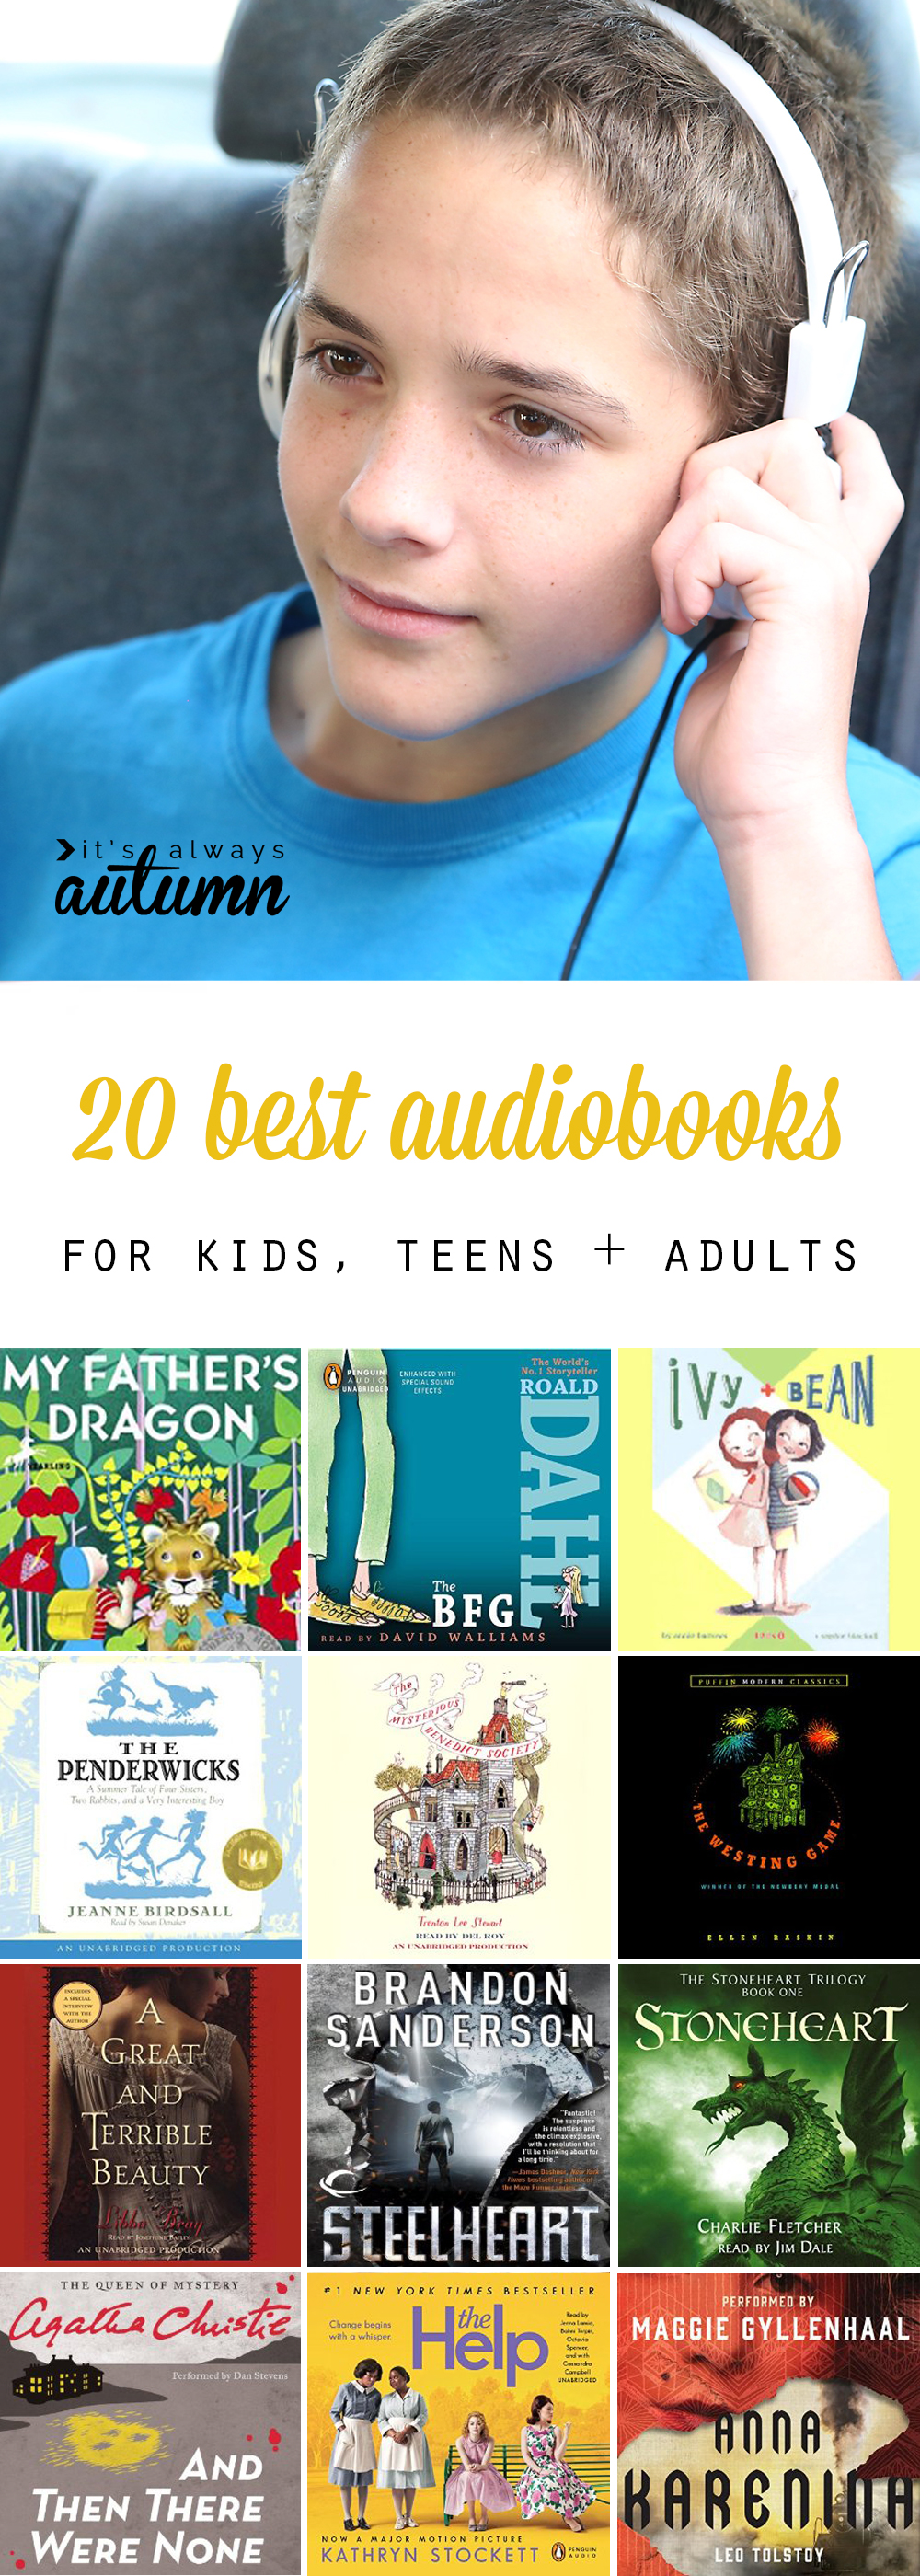 boy in a car with headphones on, collage of book covers